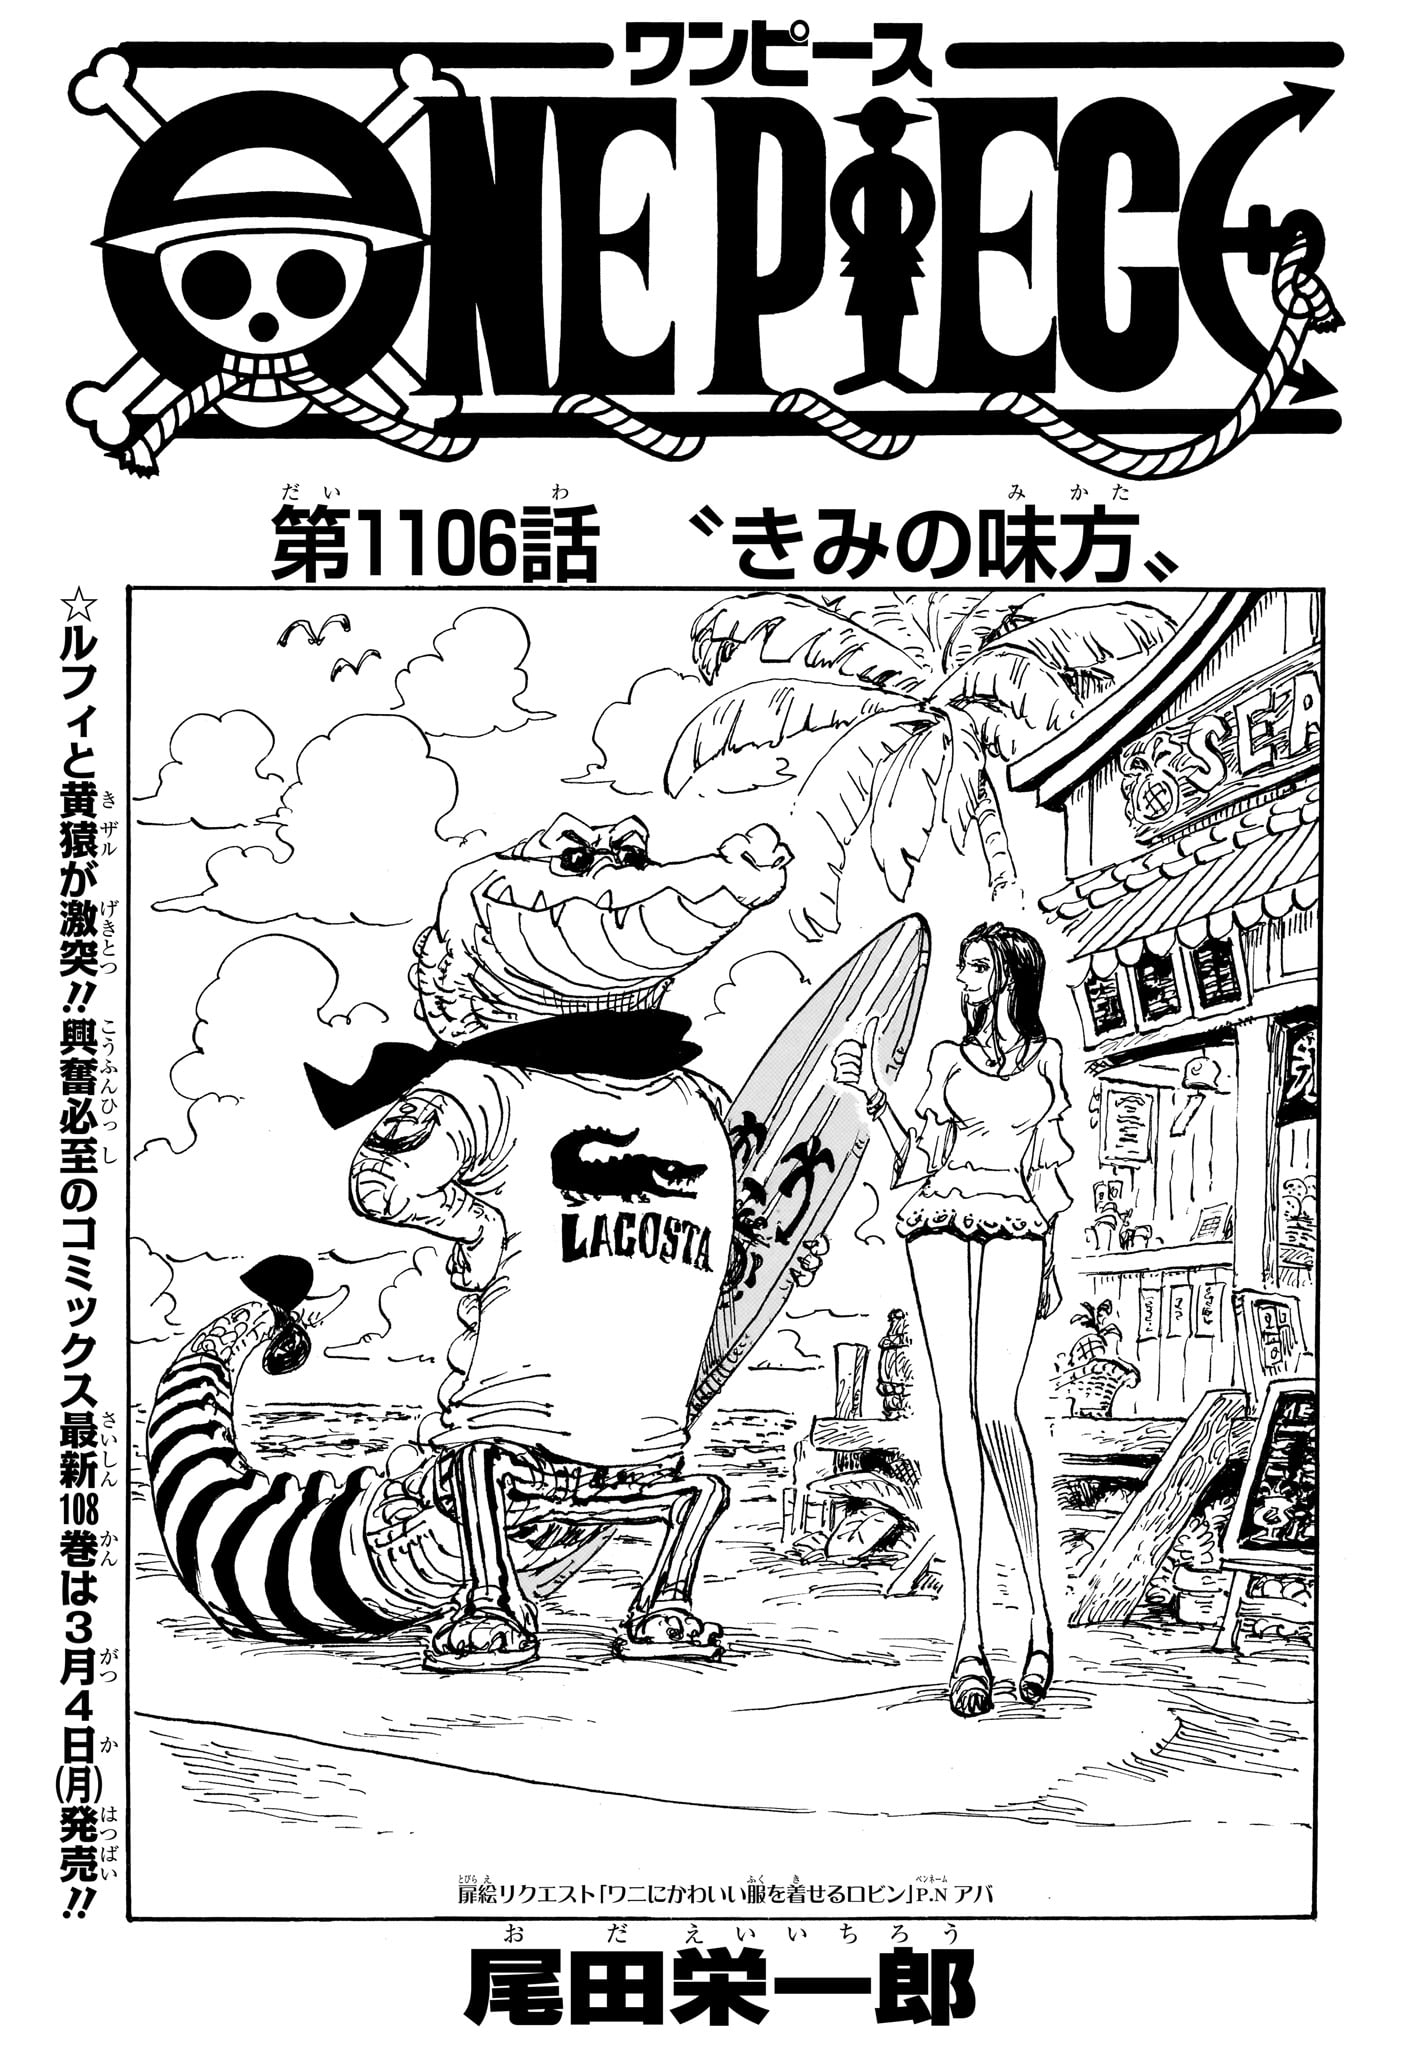 One Piece - Chapter 1106 - Page 1